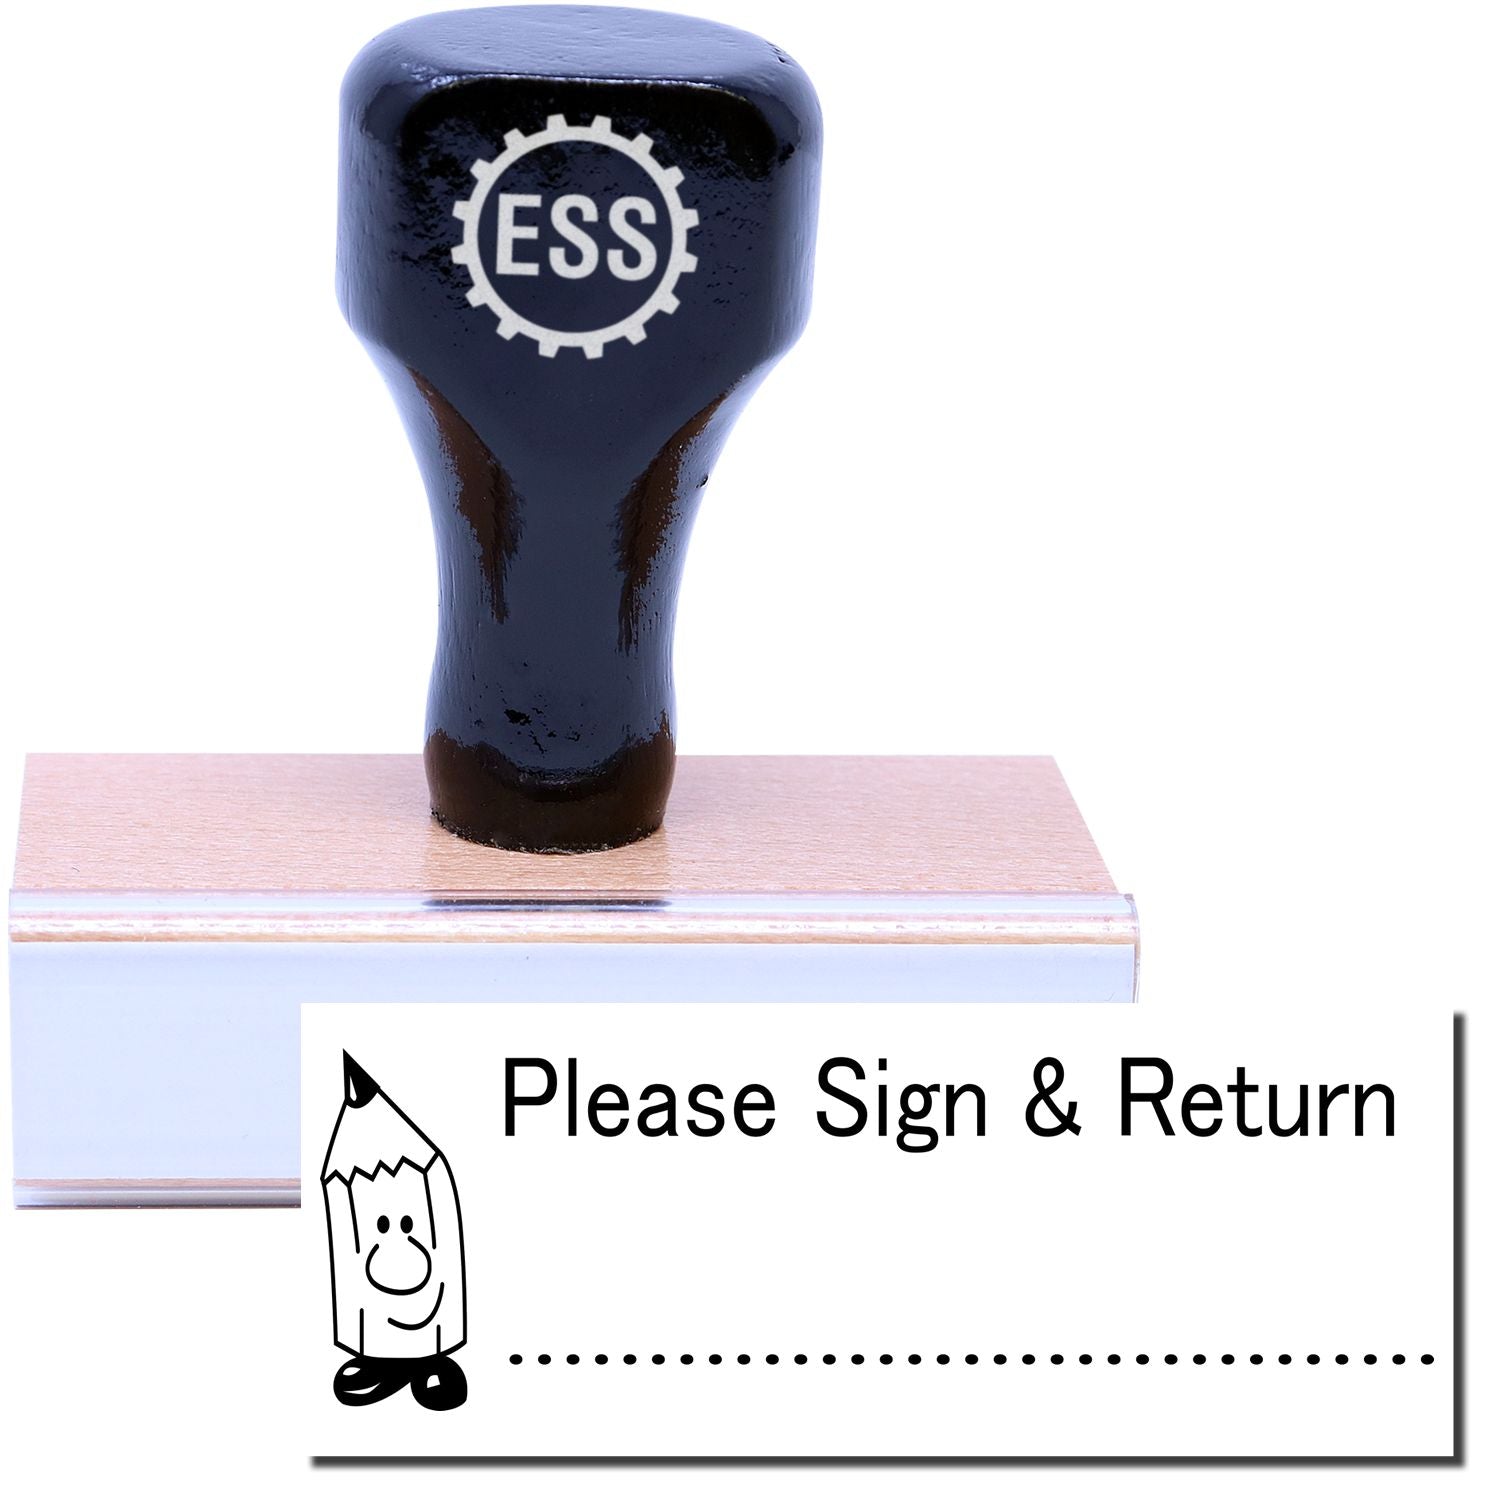 A stock office rubber stamp with a stamped image showing how the text "Please Sign & Return" with an image of a sharpened pencil and a dotted line underneath is displayed after stamping.